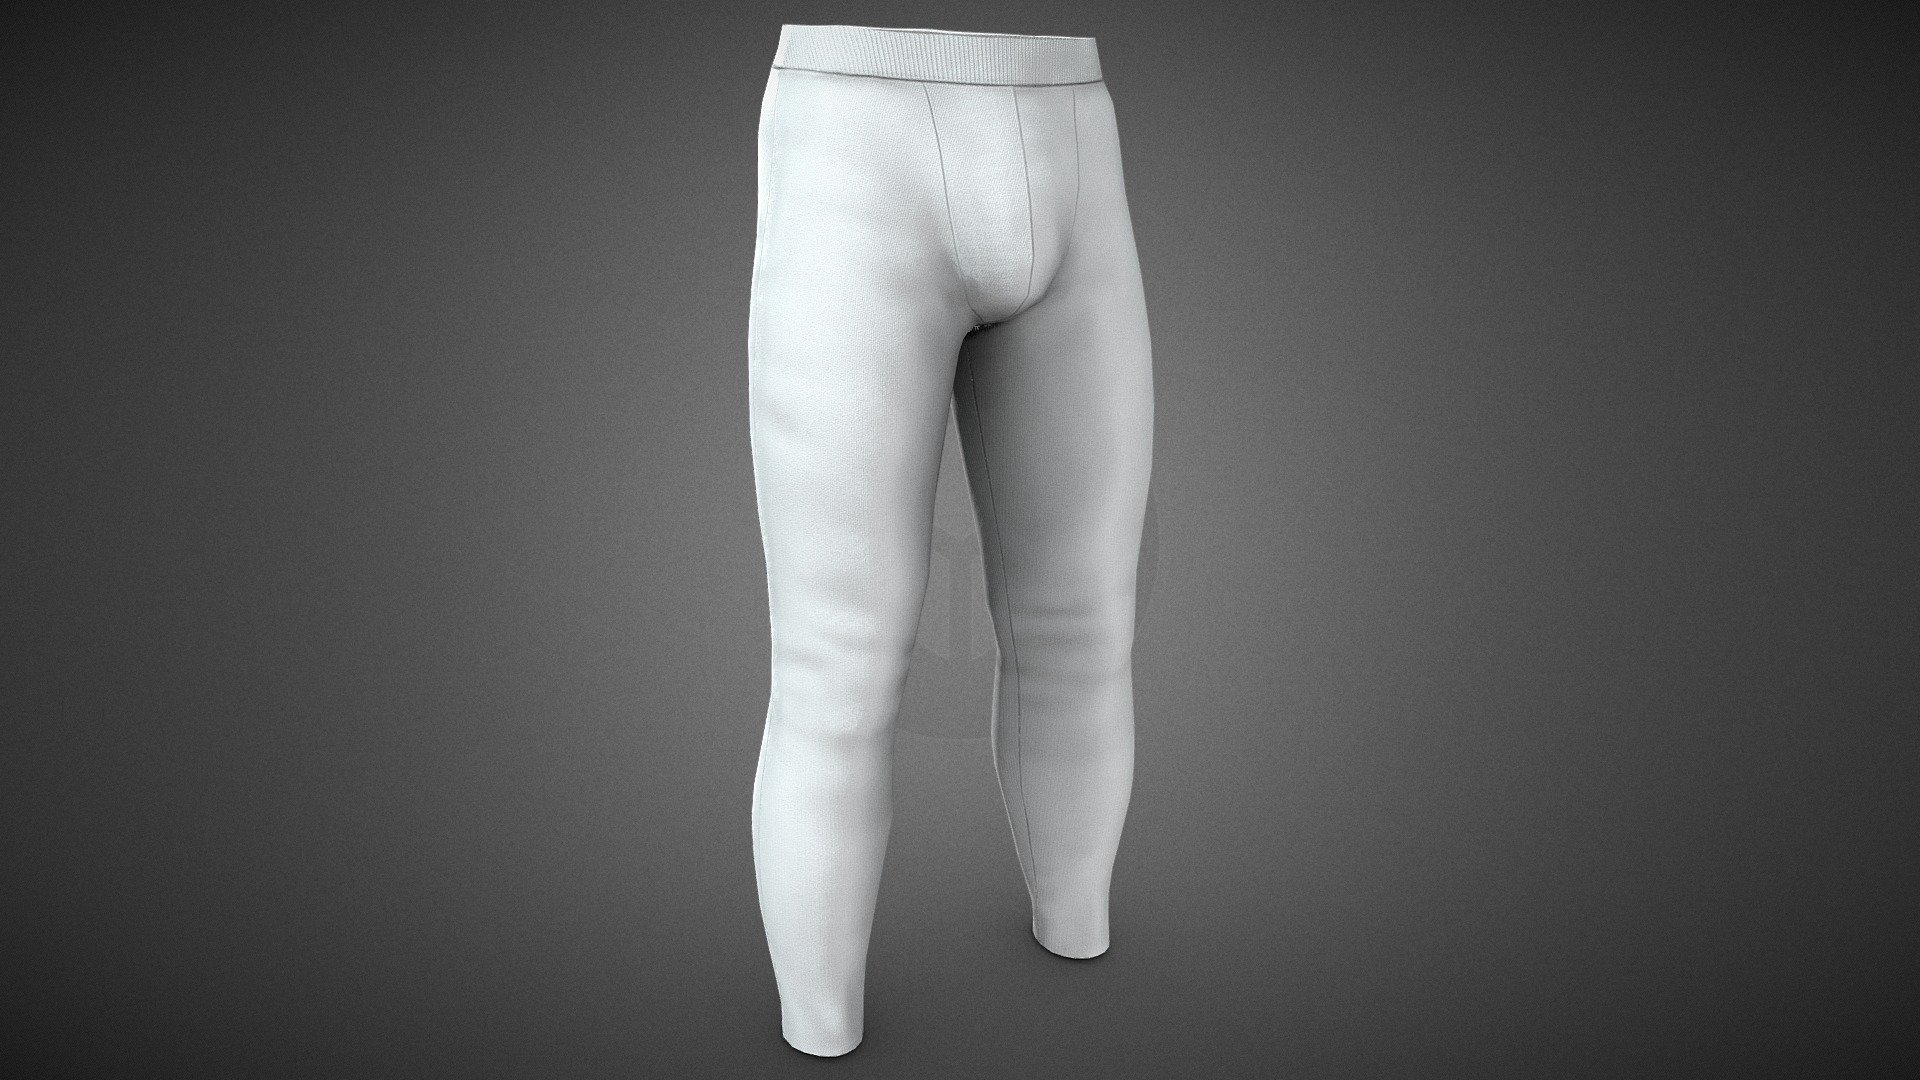 CG StudioX Present :
White Skinny Medieval Pants lowpoly/PBR




This is White Skinny Medieval Pants Comes with Specular and Metalness PBR.

The photo been rendered using Marmoset Toolbag 4 (real time game engine )


Features :



Comes with Specular and Metalness PBR 4K texture .

Good topology.

Low polygon geometry.

The Model is prefect for game for both Specular workflow as in Unity and Metalness as in Unreal engine .

The model also rendered using Marmoset Toolbag 4 with both Specular and Metalness PBR and also included in the product with the full texture.

The texture can be easily adjustable .


Texture :



One set of UV [Albedo -Normal-Metalness -Roughness-Gloss-Specular-Ao] (4096*4096)


Files :
Marmoset Toolbag 4 ,Maya,,FBX,OBj with all the textures.




Contact me for if you have any questions.
 - White Skinny Medieval Pants - Buy Royalty Free 3D model by CG StudioX (@CG_StudioX) 3d model